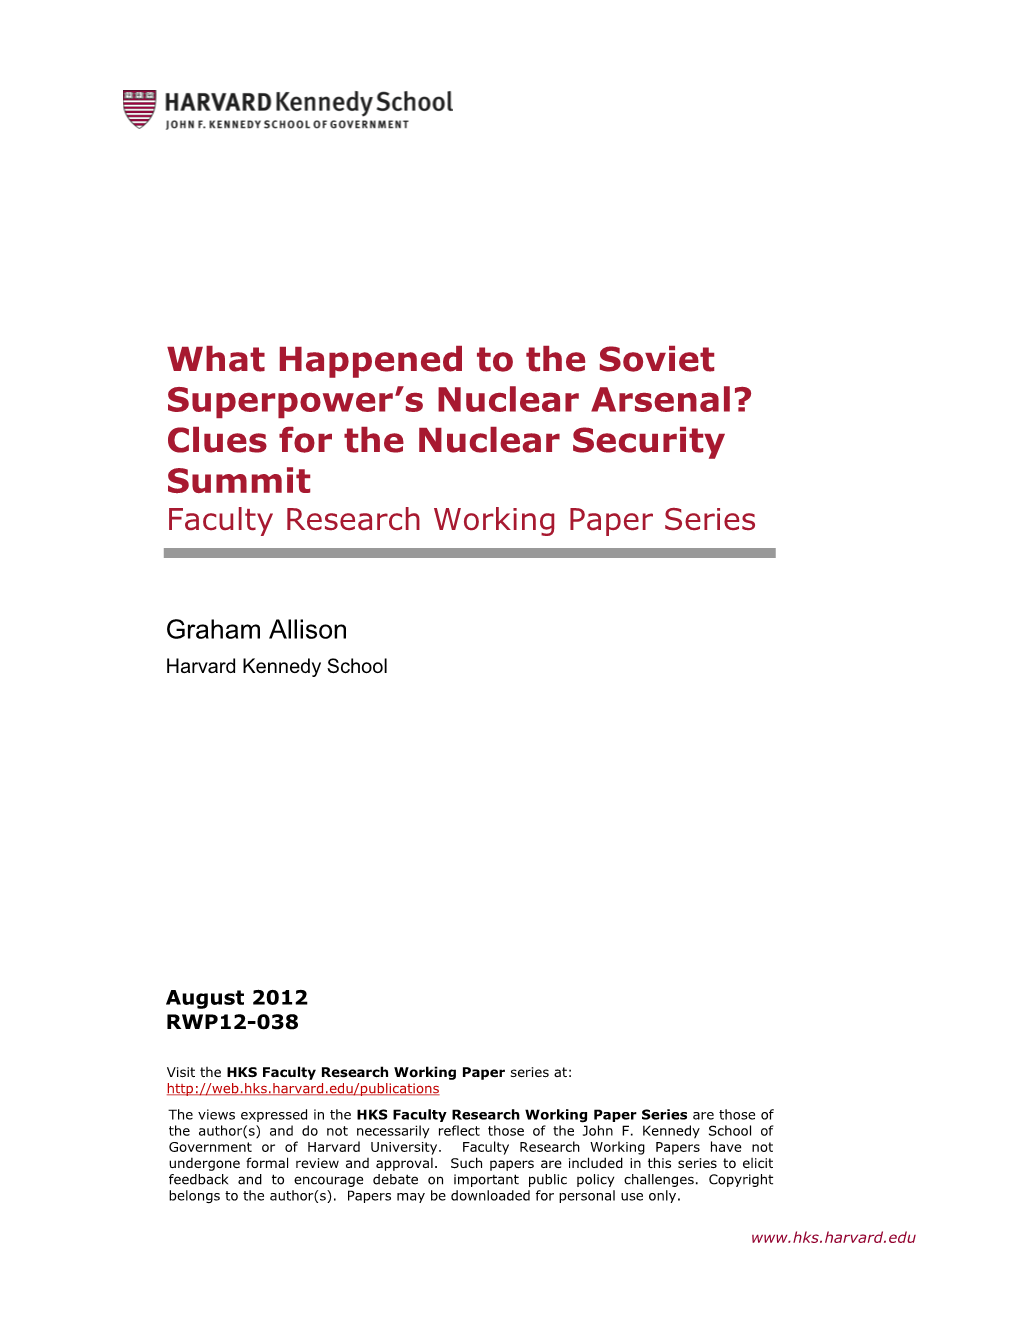 What Happened to the Soviet Superpower's Nuclear Arsenal? Clues for the Nuclear Security Summit